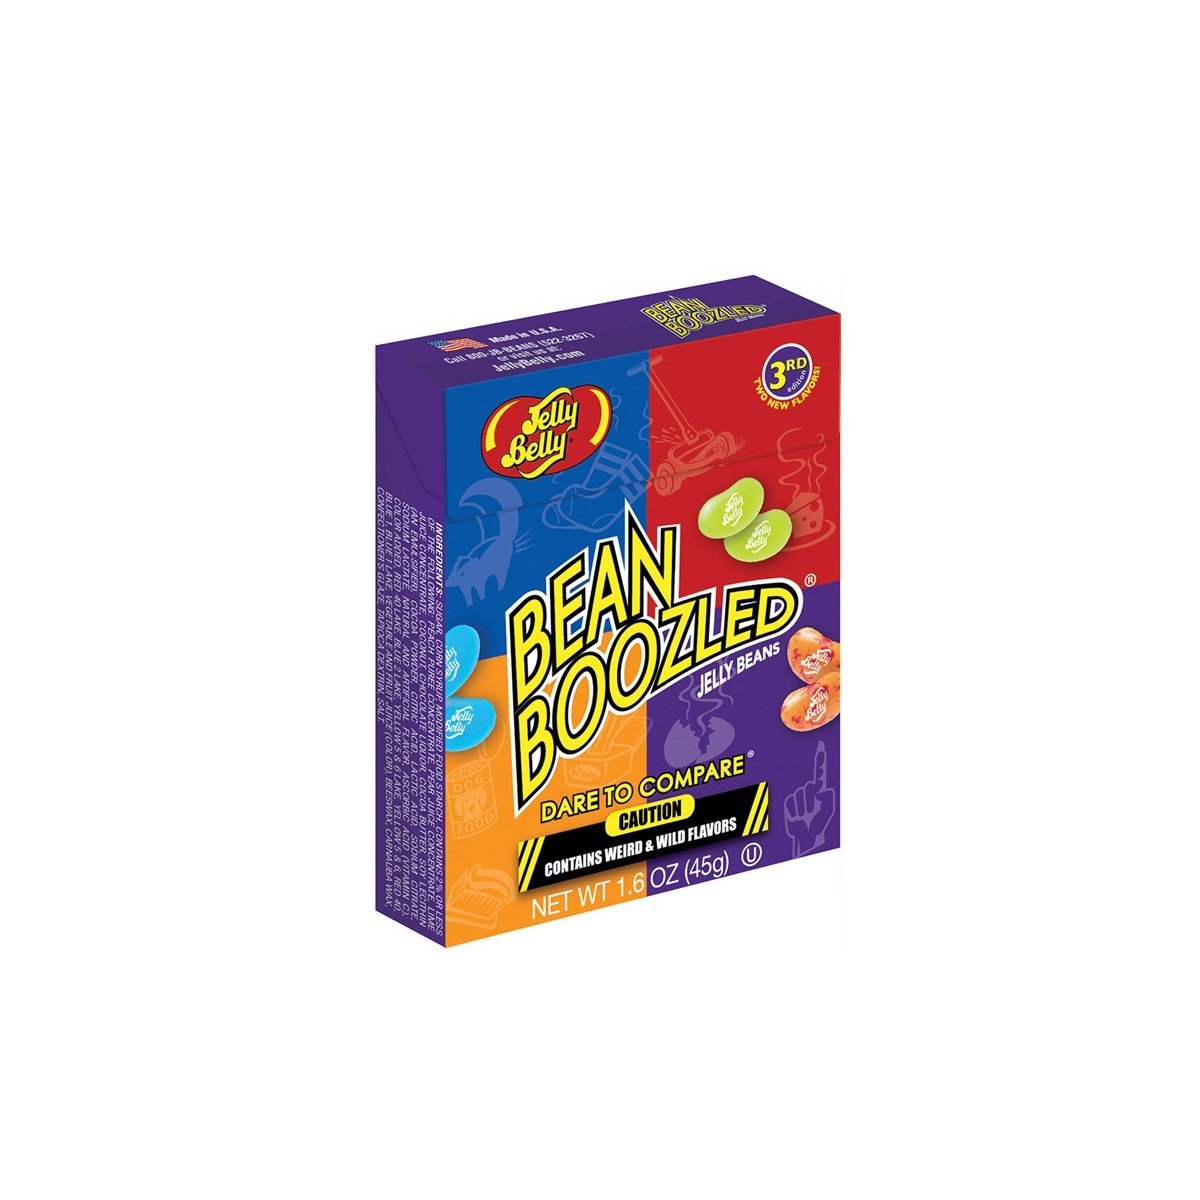 Caja Chica Bean Boozled Jelly Belly